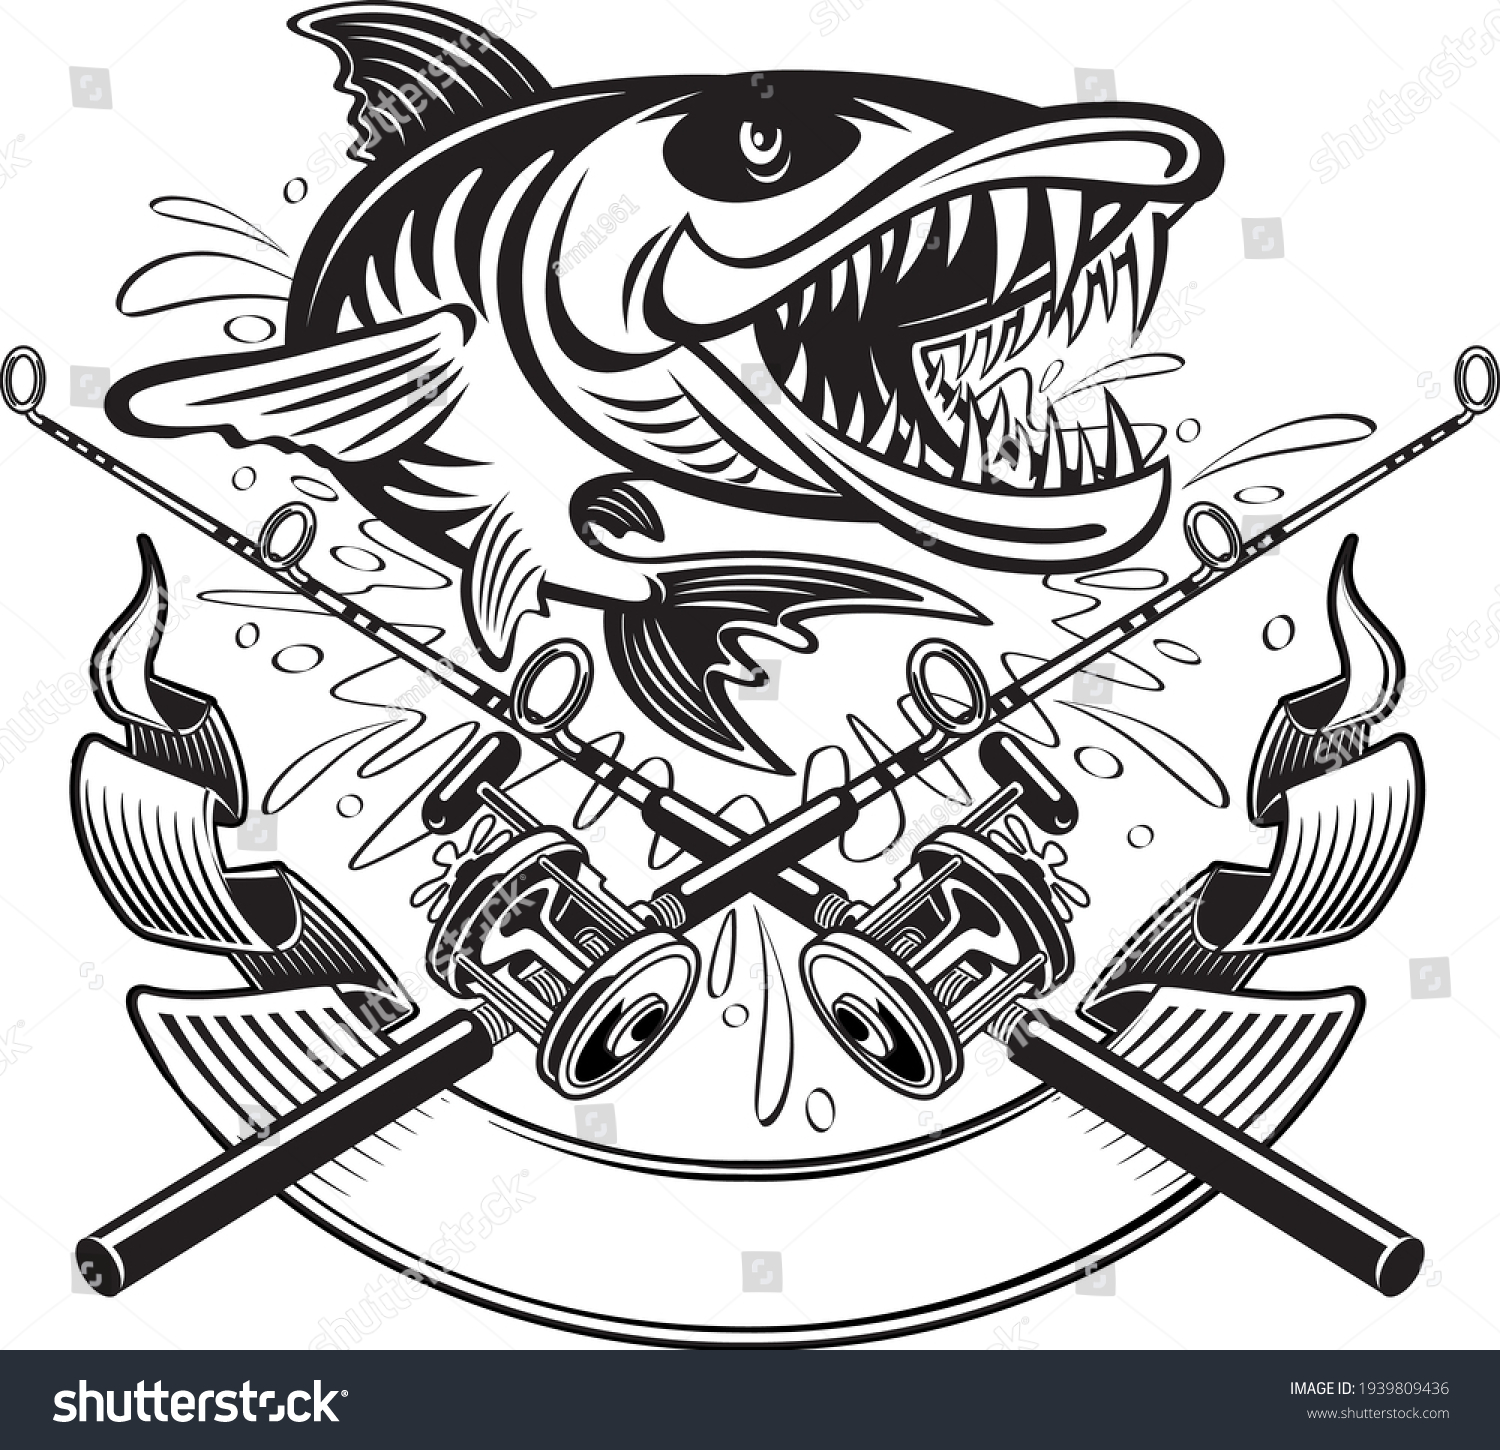 SVG of crossed fishing rod and reels, barracuda and banner
 svg